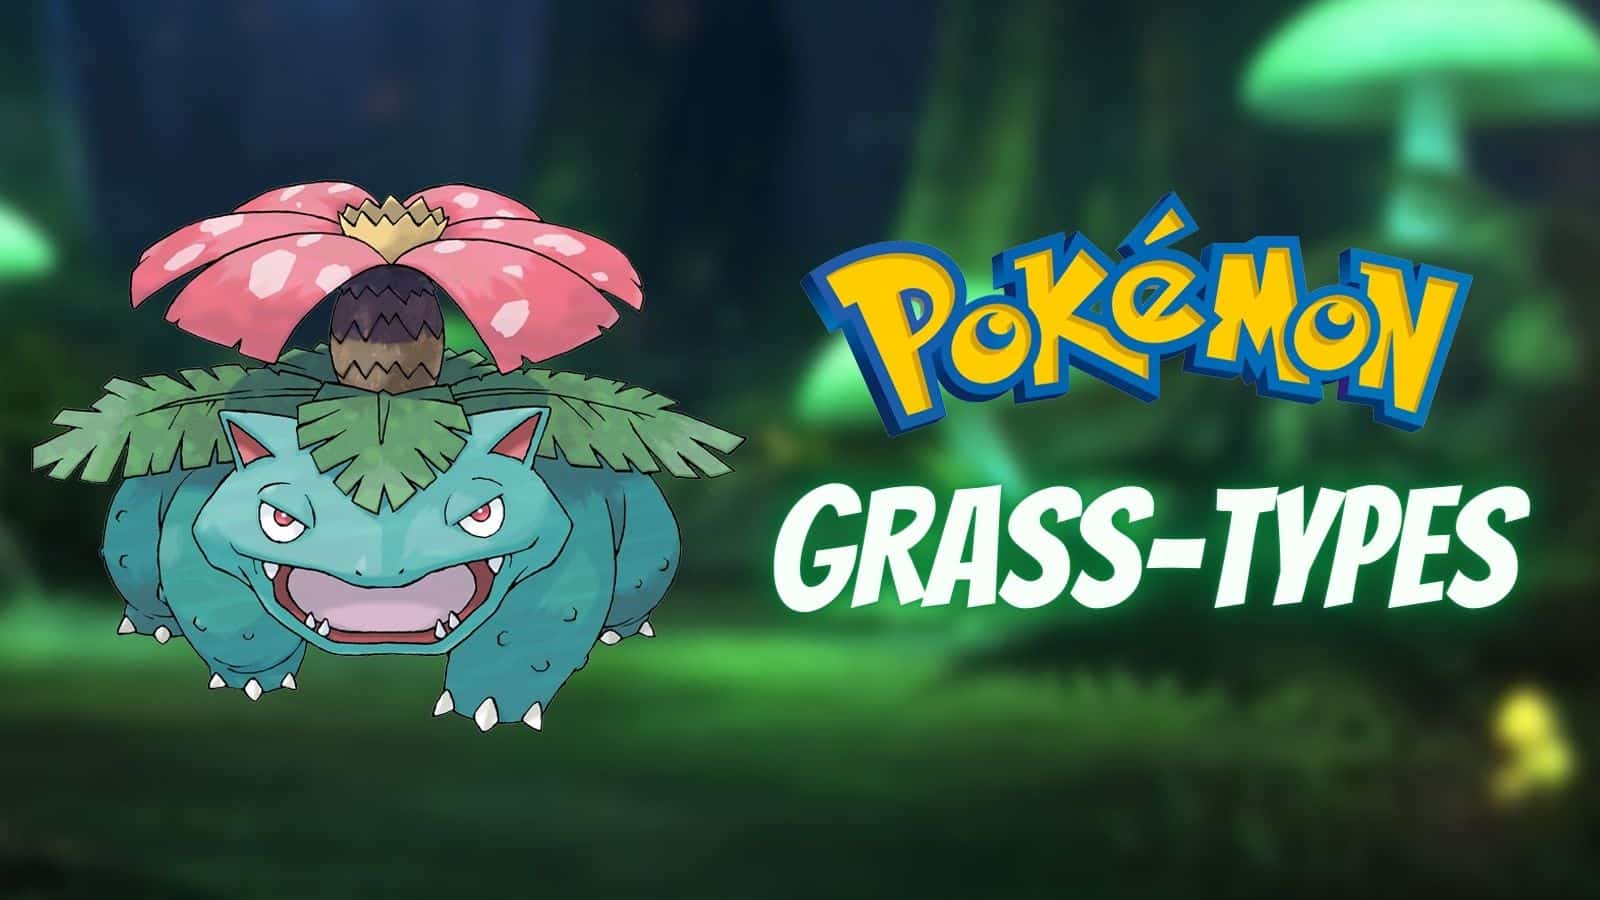 An image of the Pokemon logo with Grass types and Venusaur